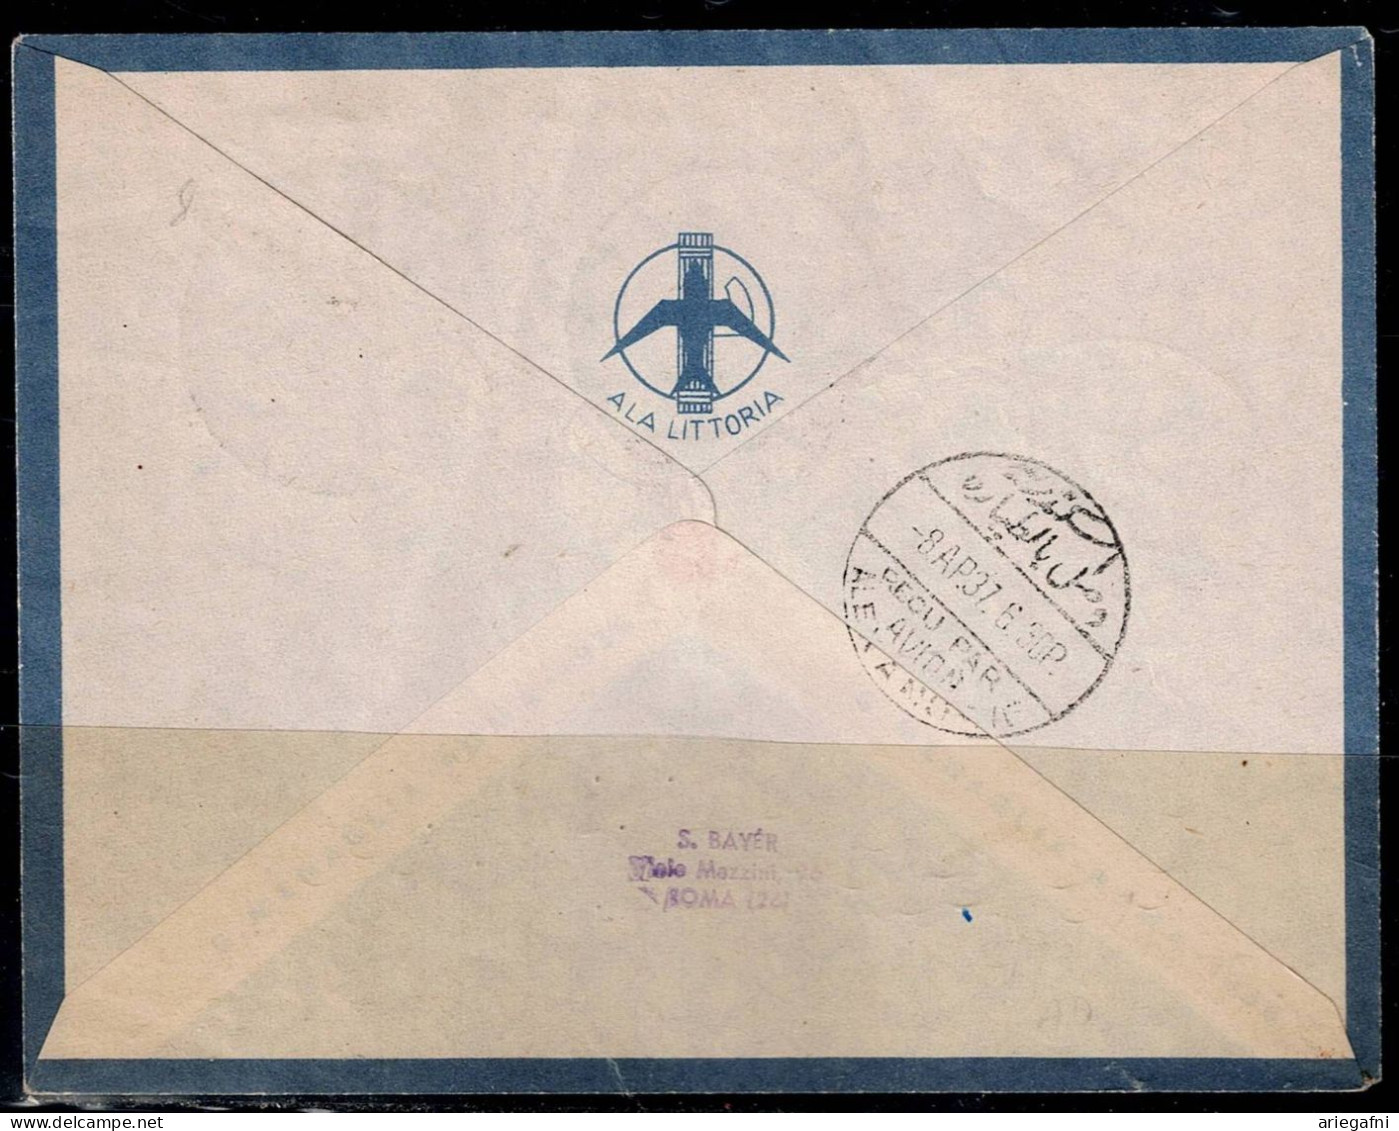 ISRAEL 1937 COVER FLYING BY AIR MAIL IN7/4/37 FROM ROMA VIA HAIFA TO ALESSANDRIA VF!! - Posta Aerea